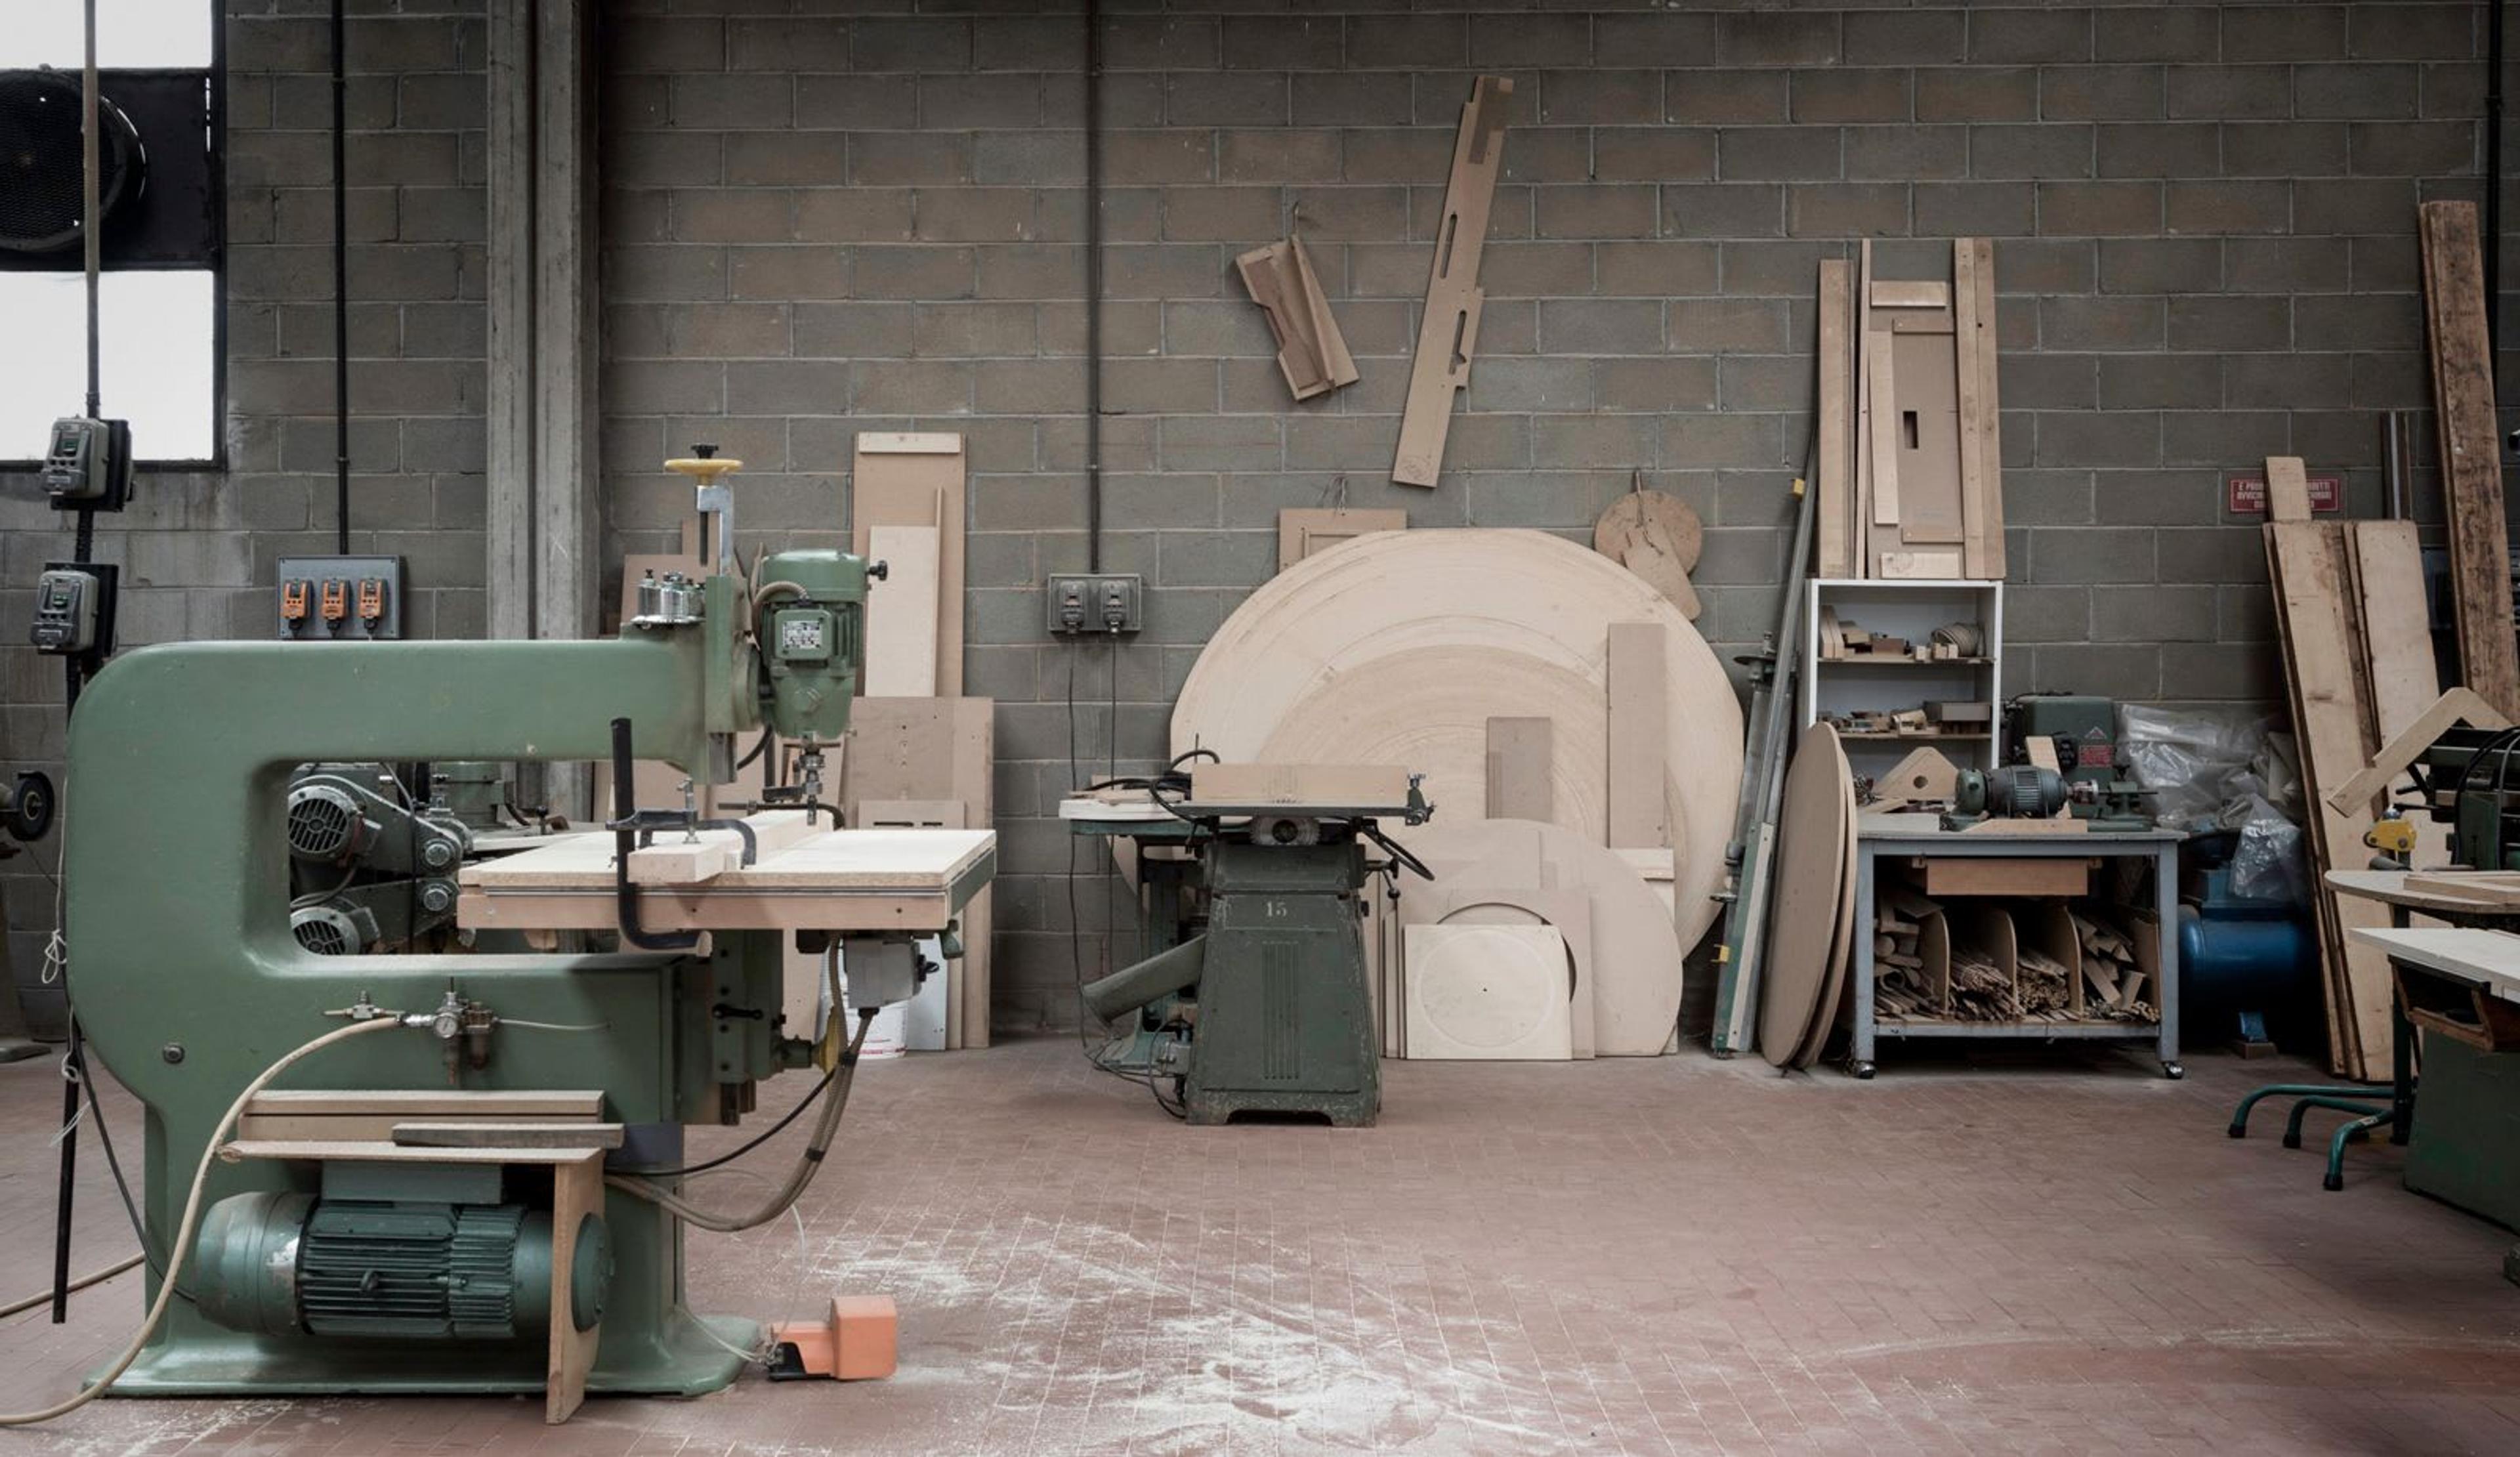 Giordano Viganò workshop in the Brianza district, an area known worldwide for its excellence in furniture design